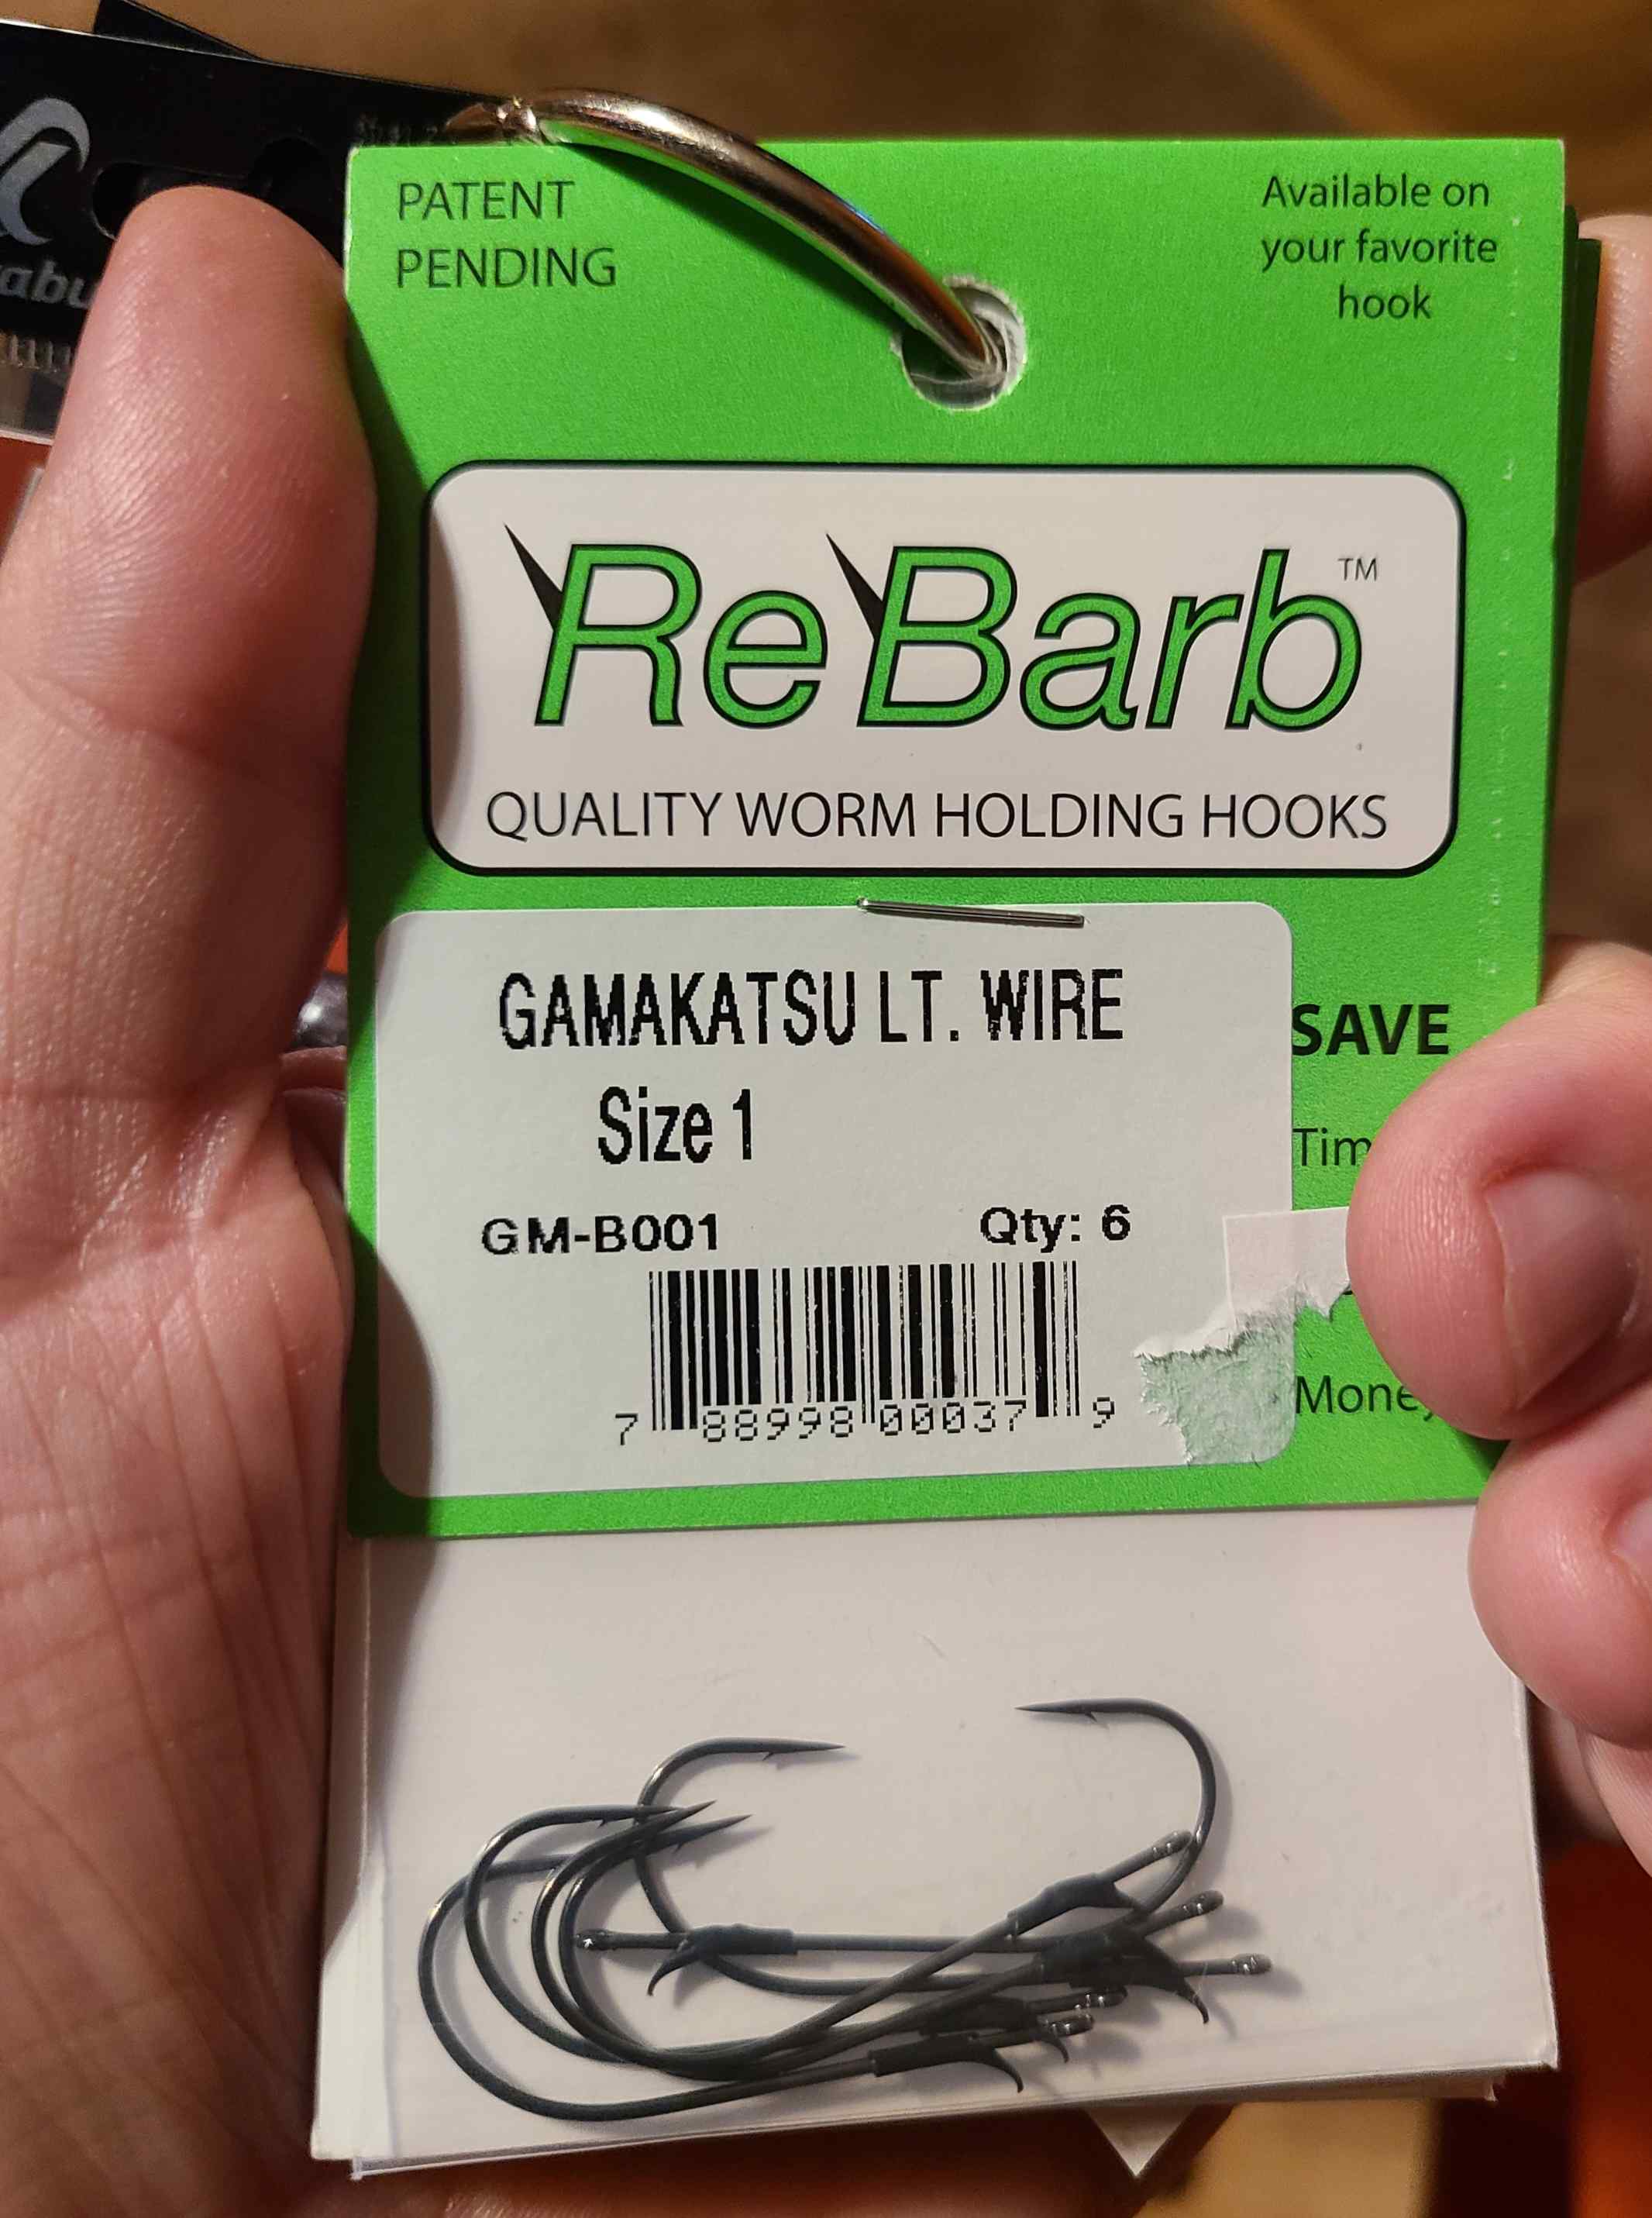 Anyone have experience with Roboworm ReBarb hooks specifically